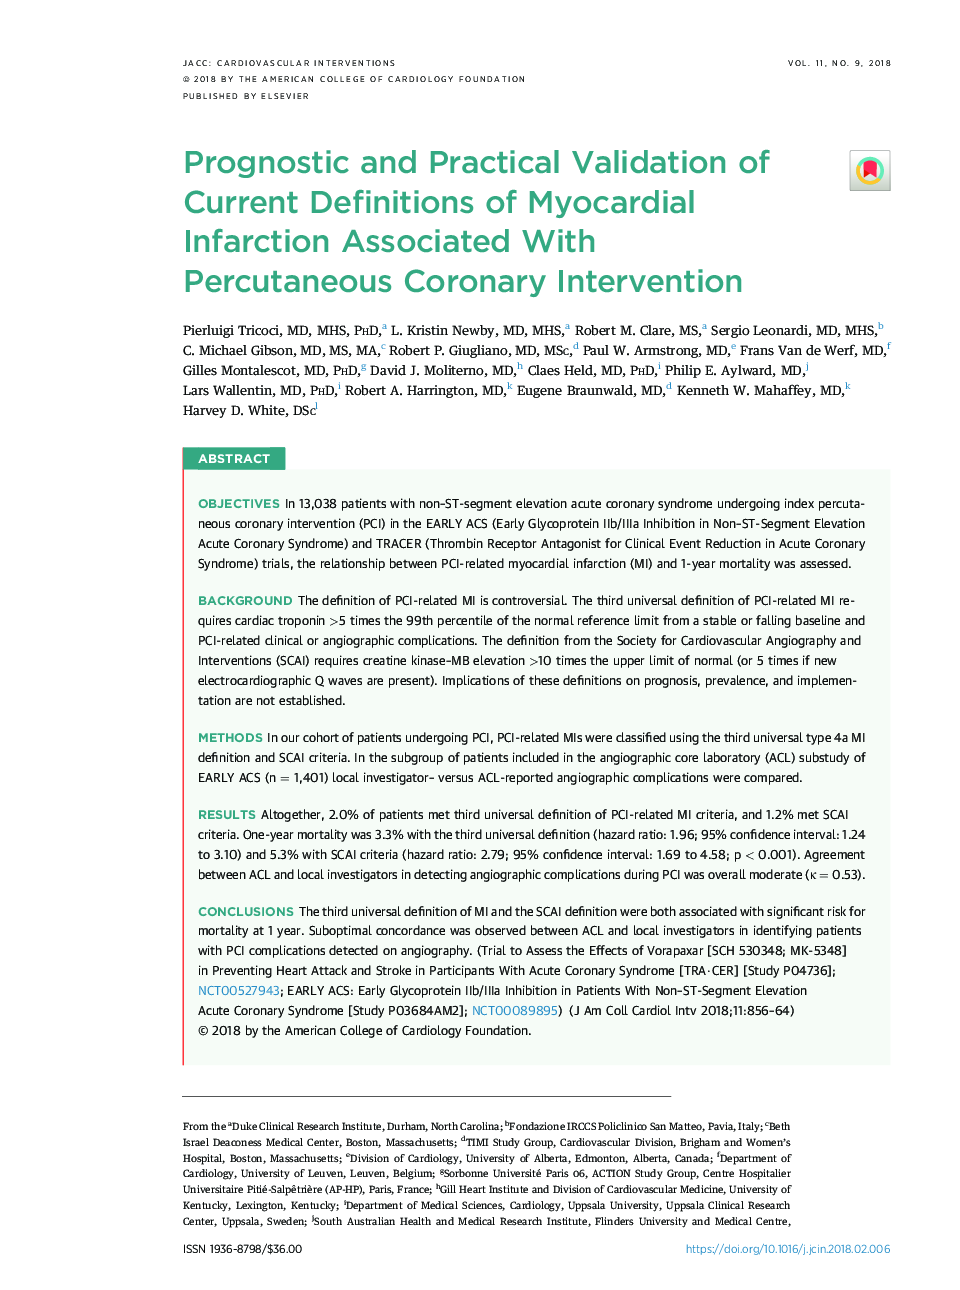 Prognostic and Practical Validation of Current Definitions of Myocardial Infarction Associated With PercutaneousÂ Coronary Intervention